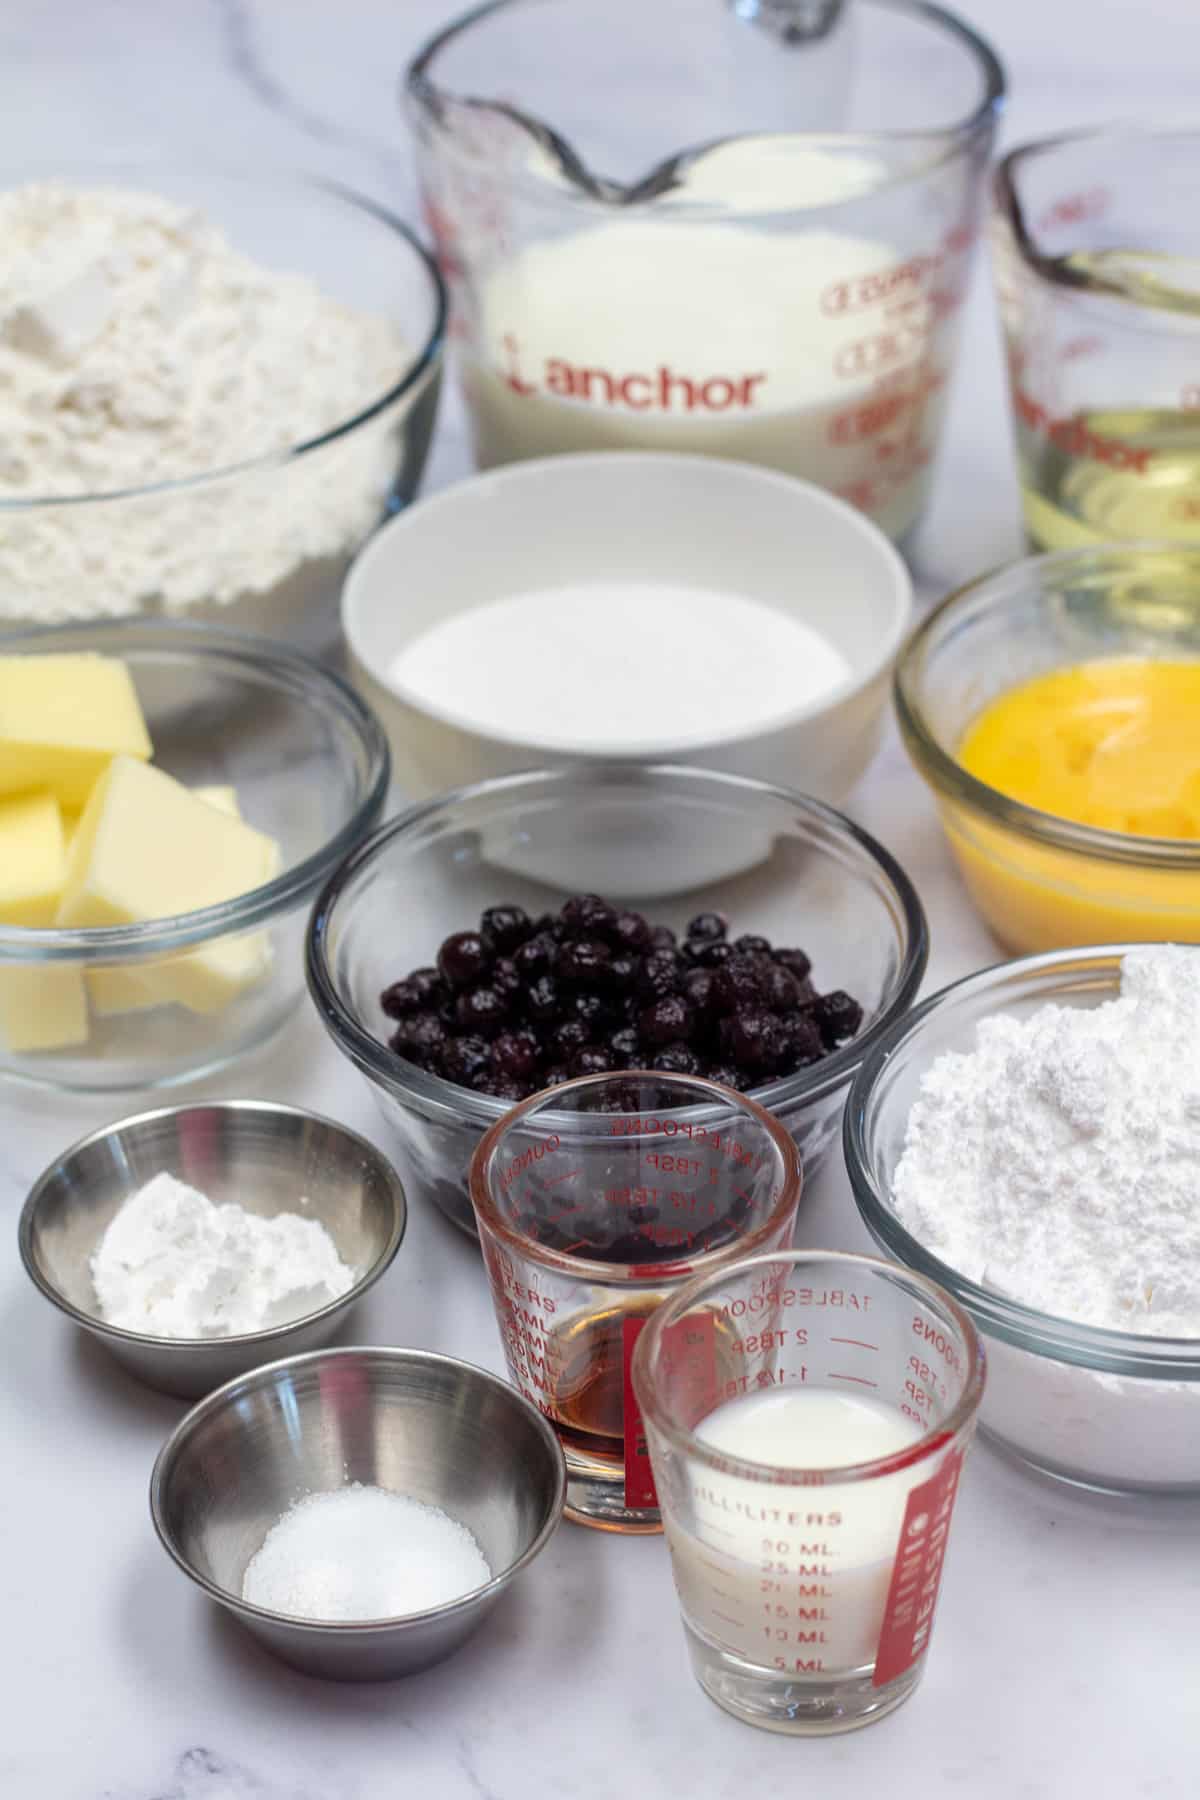 Tall image showing ingredients needed for making baked blueberry donuts.